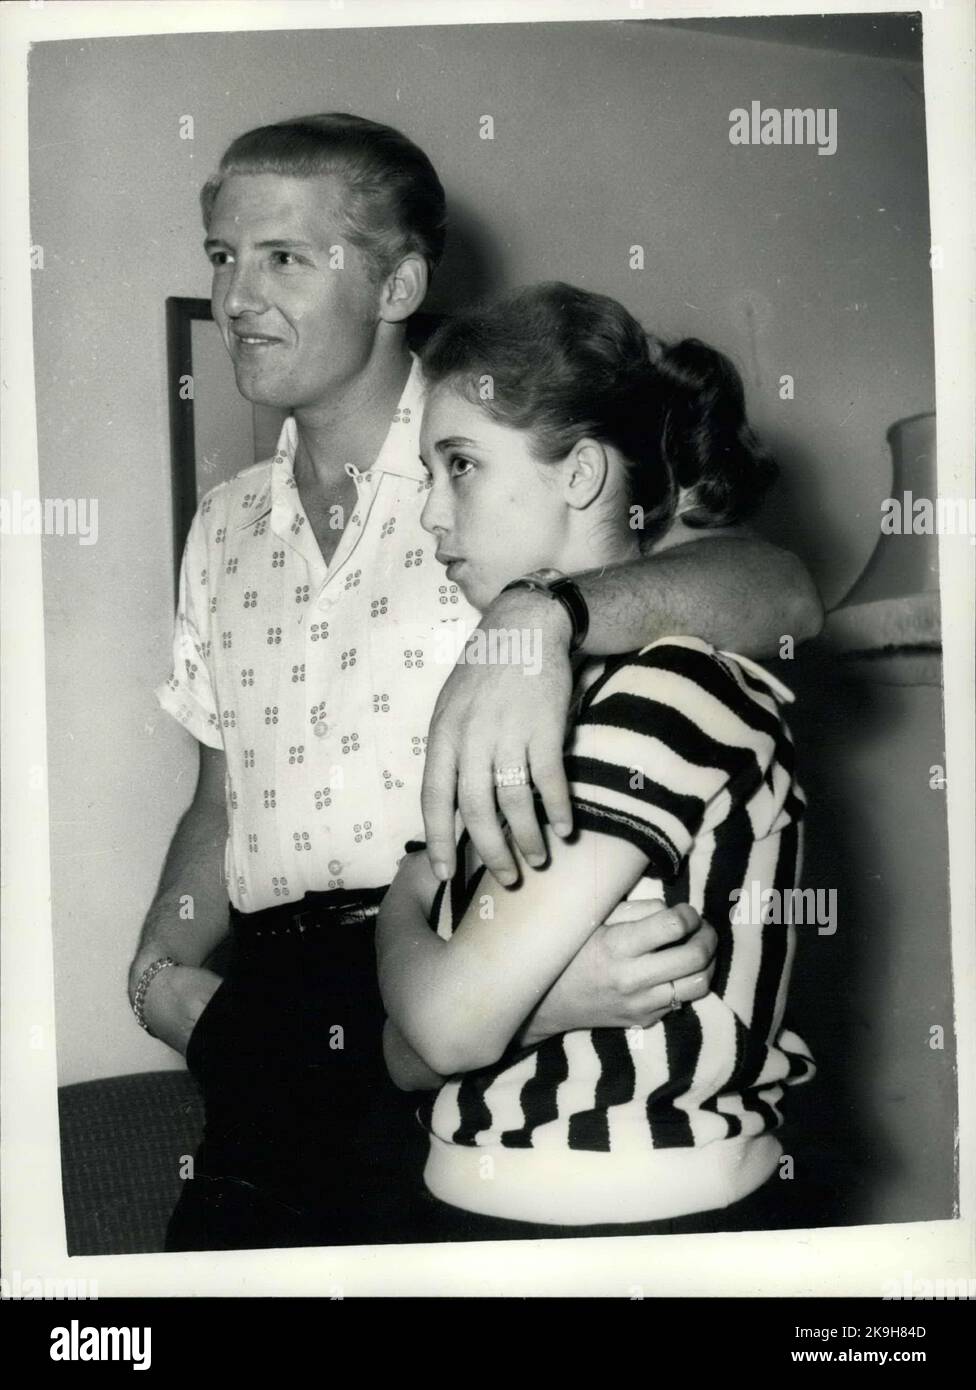 May 23, 1958 - 22 Year-Old American Rock 'N Roll Singer Arrives Here With  His 15 Year Old Wife; Jerry Lee Lewis, the American rock ' n roll singer,  flew into London yesterday with a shock for his fans. For the girl who  arrived with him turned out to be his 15 ...